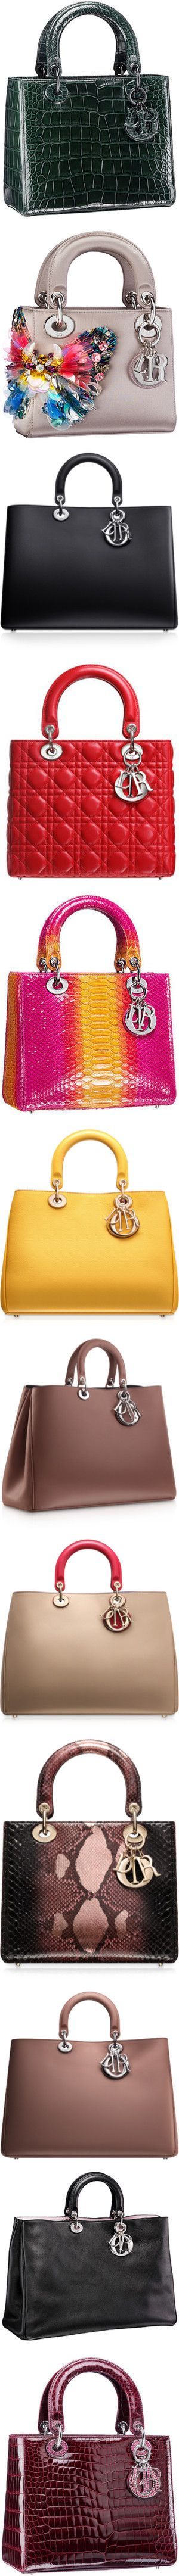 Lady Dior Handbags Collection & more Luxury brands You Can Buy Online Right ...